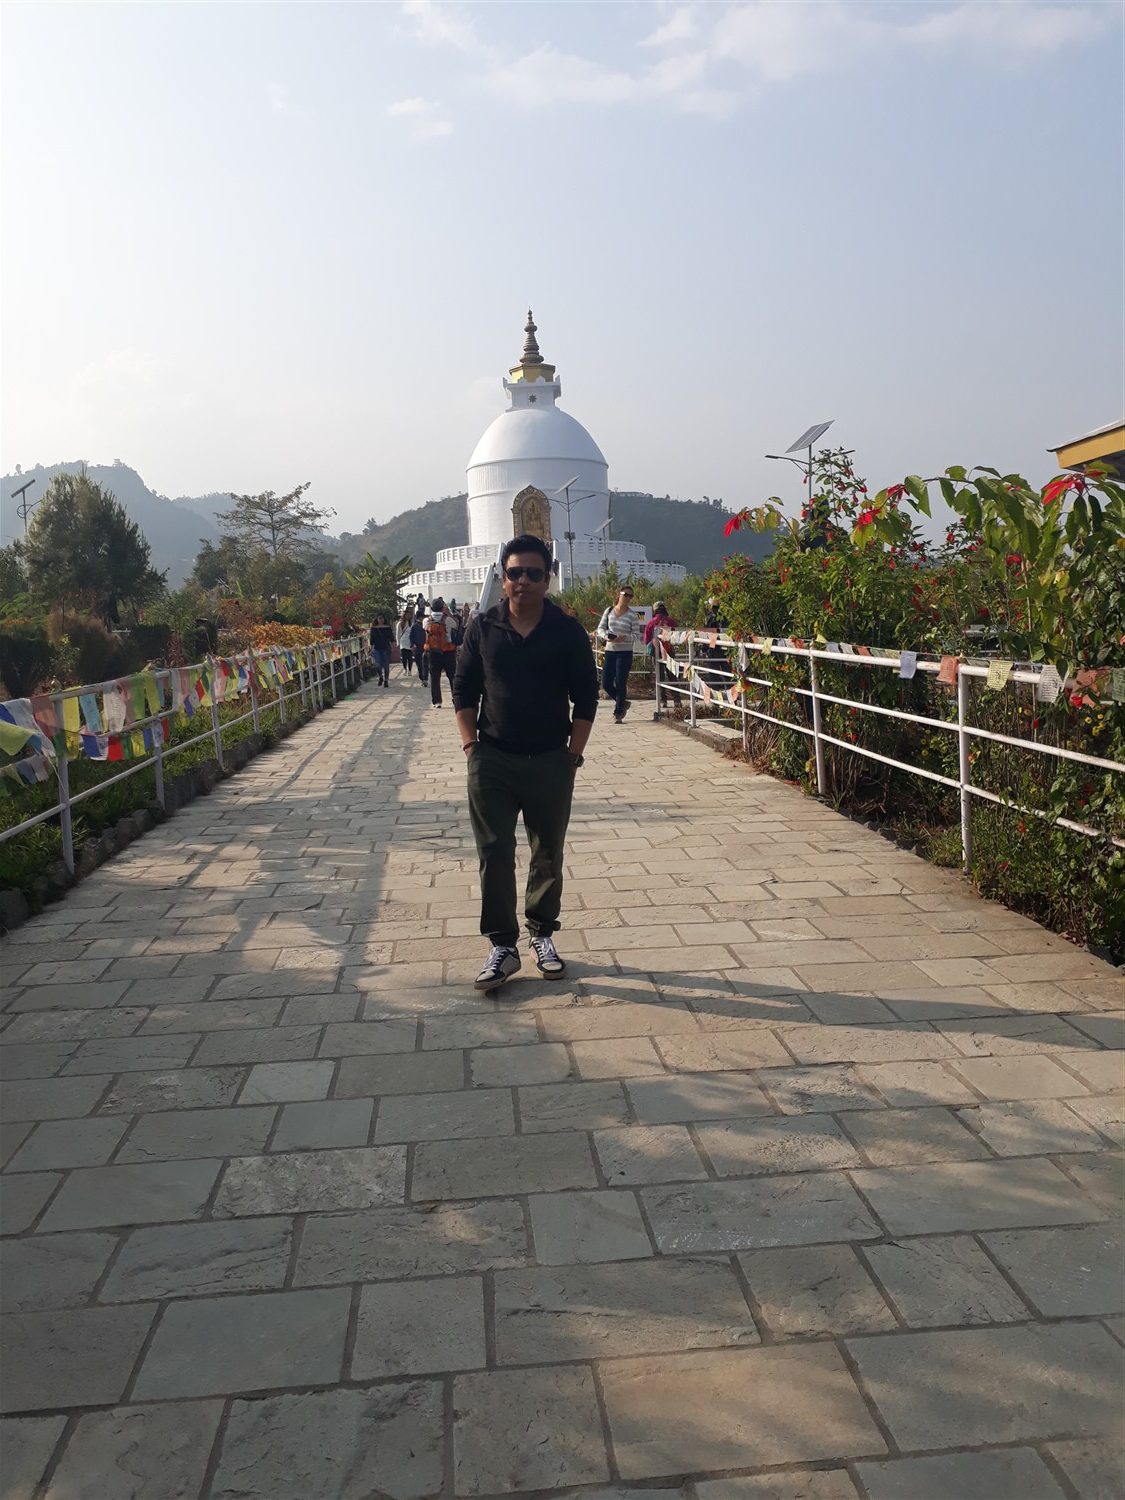 Day 3 & 4 : The Weather Was Very Nice In Pokhara : Nepal (Dec’17) 23